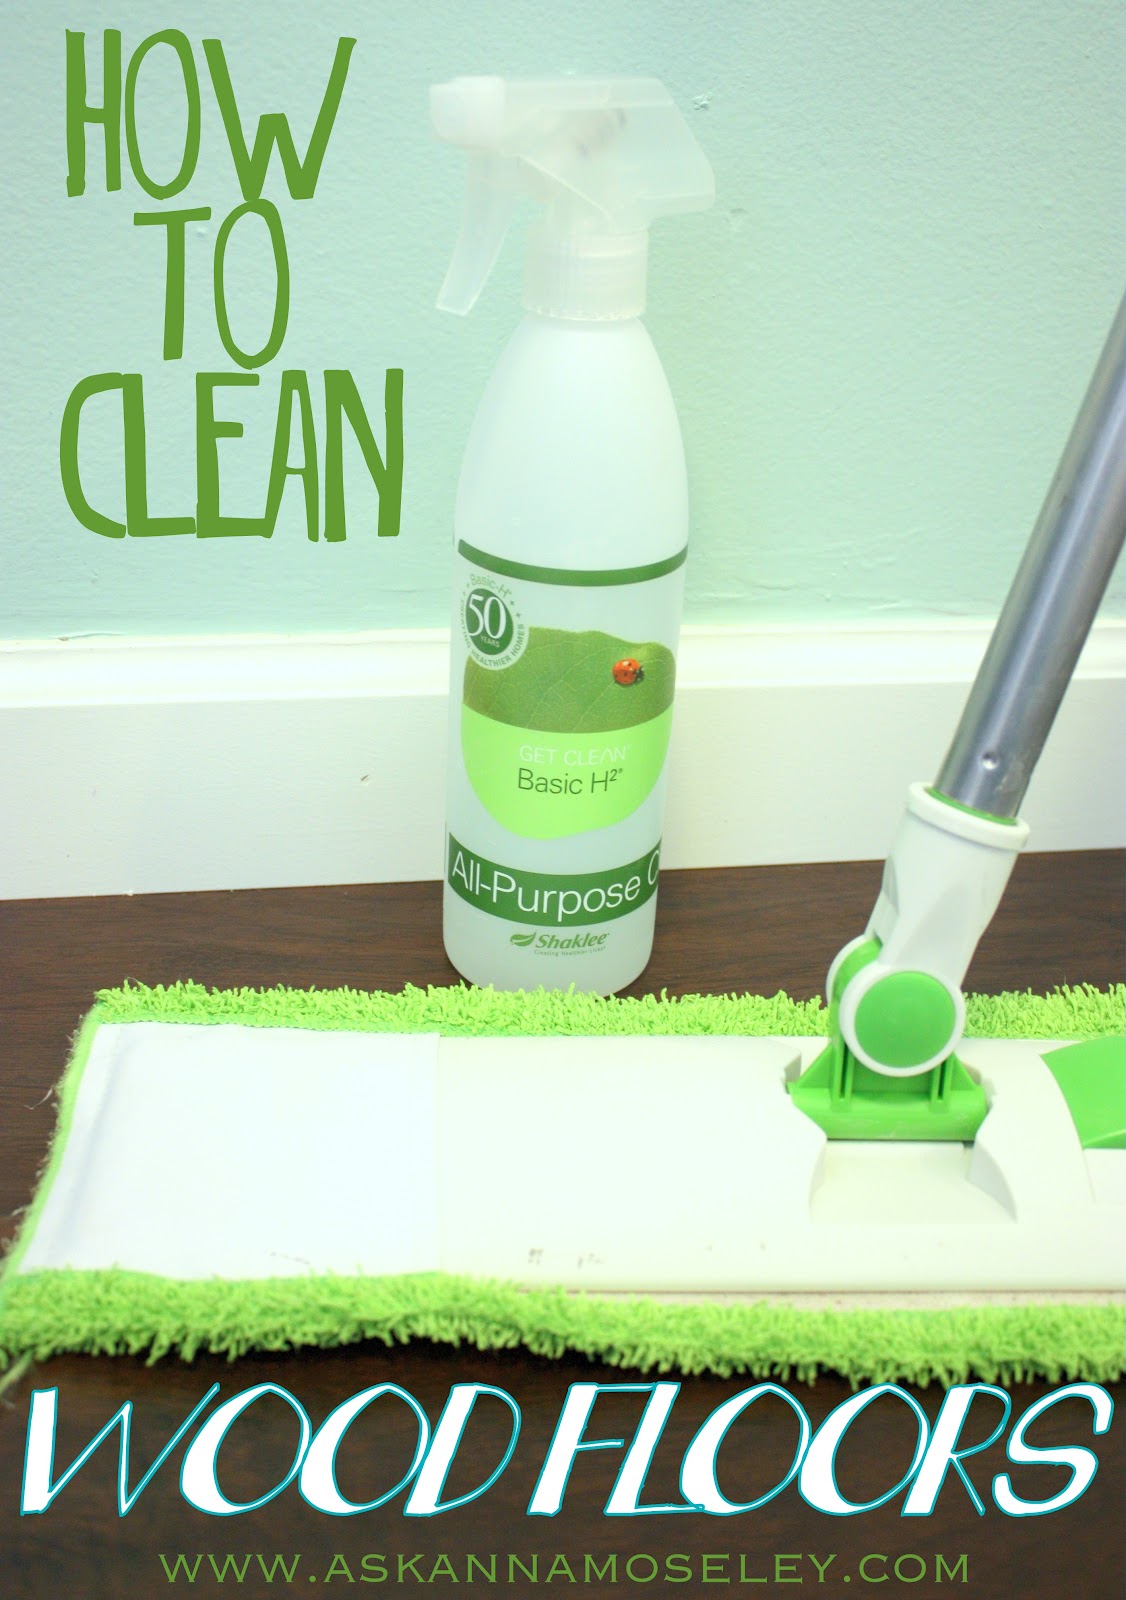 How to Clean Wood Floors without Chemicals